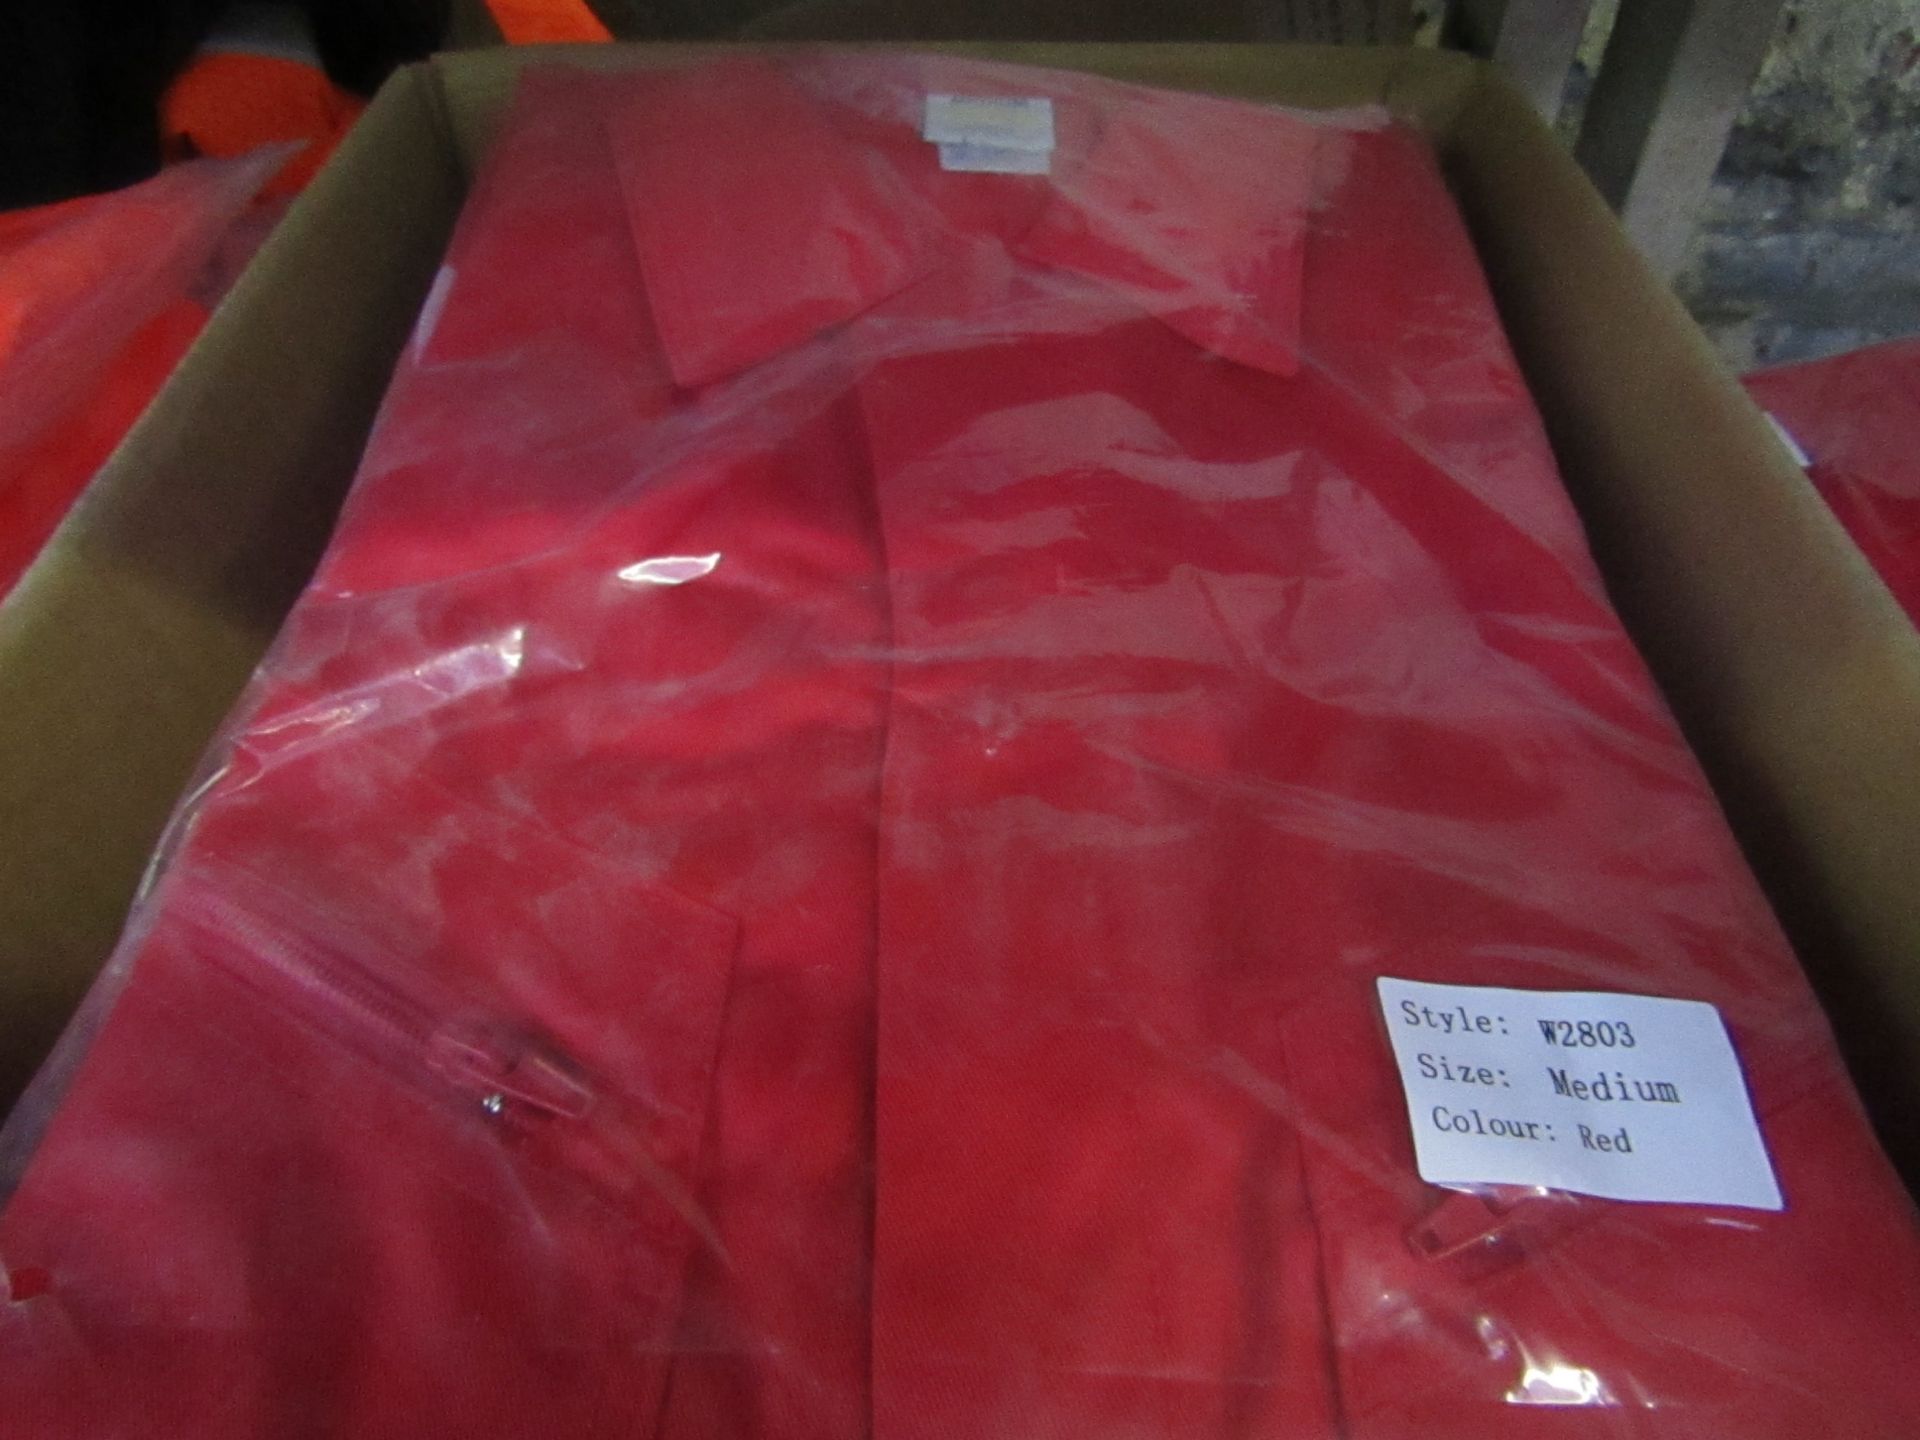 Black Knight - Red Boilersuit - Size Medium - All Packaged.